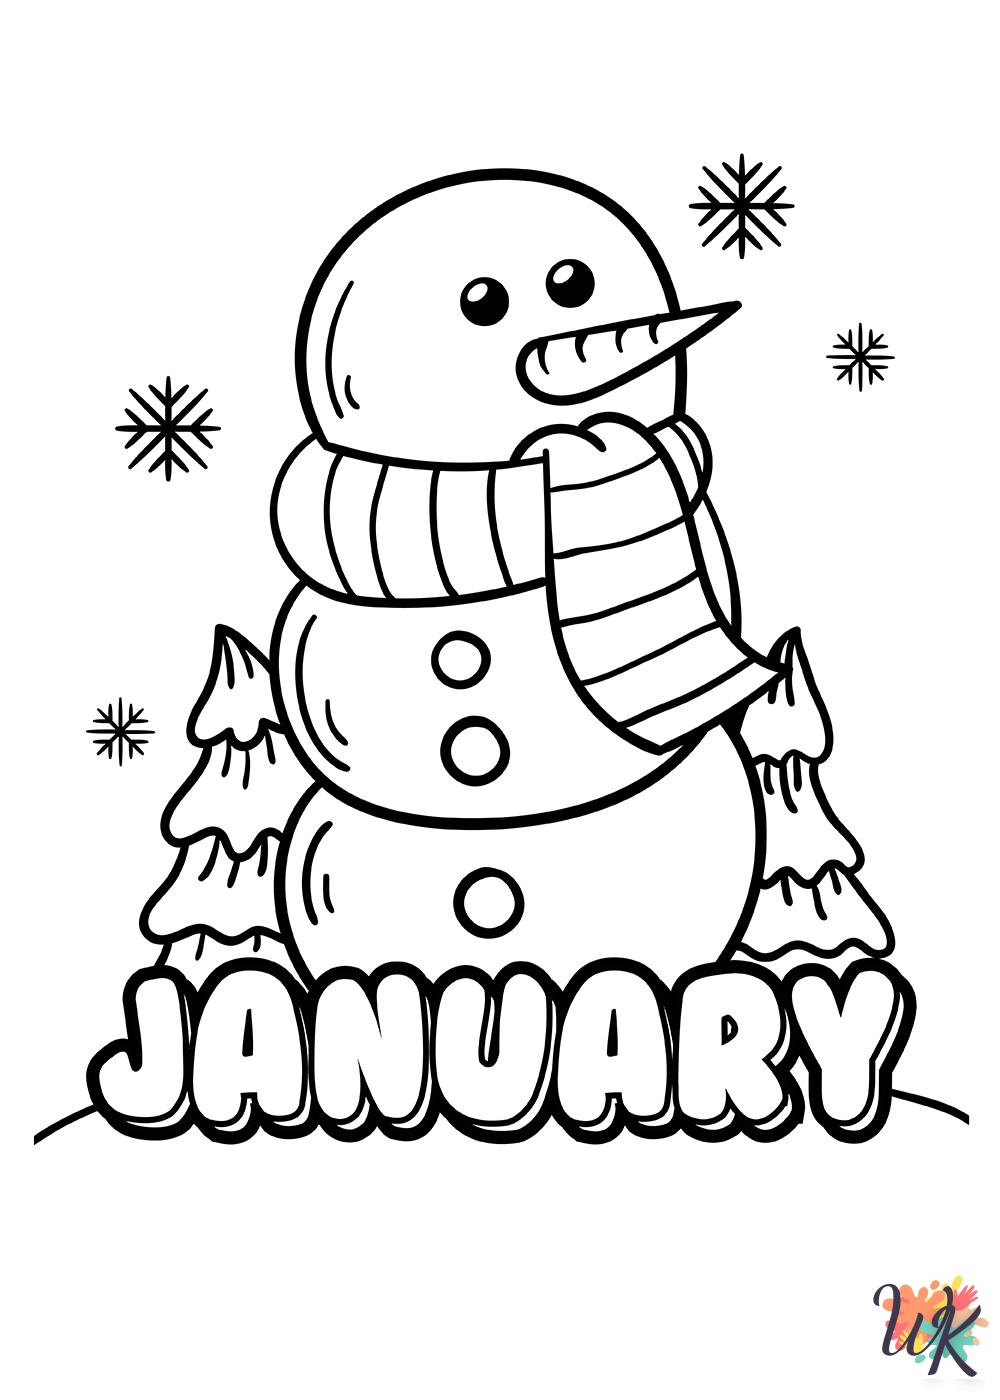 merry January coloring pages